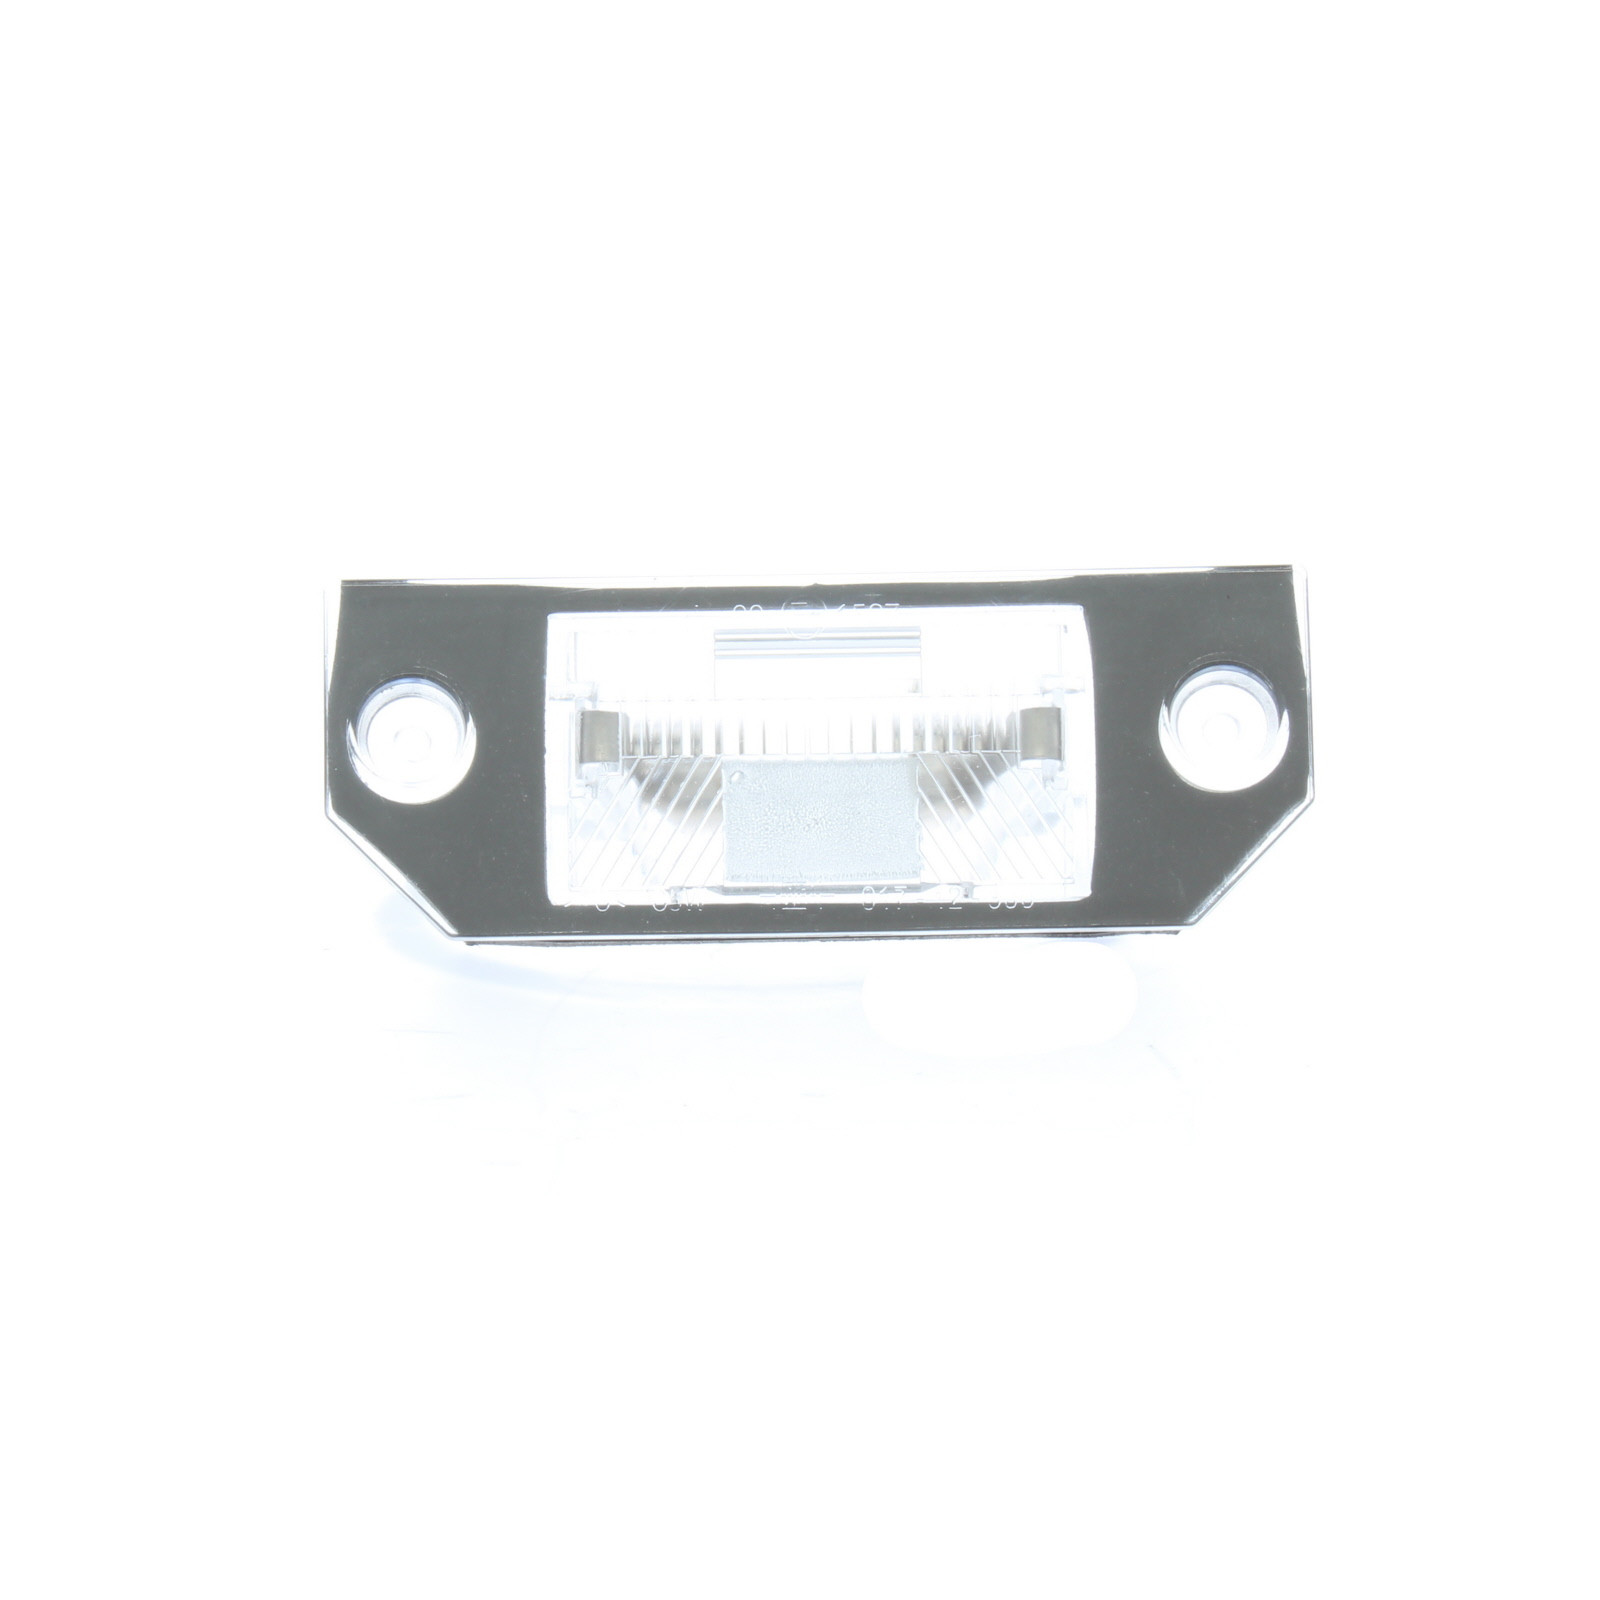 Ford C-MAX / Focus / Focus C-MAX Rear Number Plate Light - Universal (LH or RH)